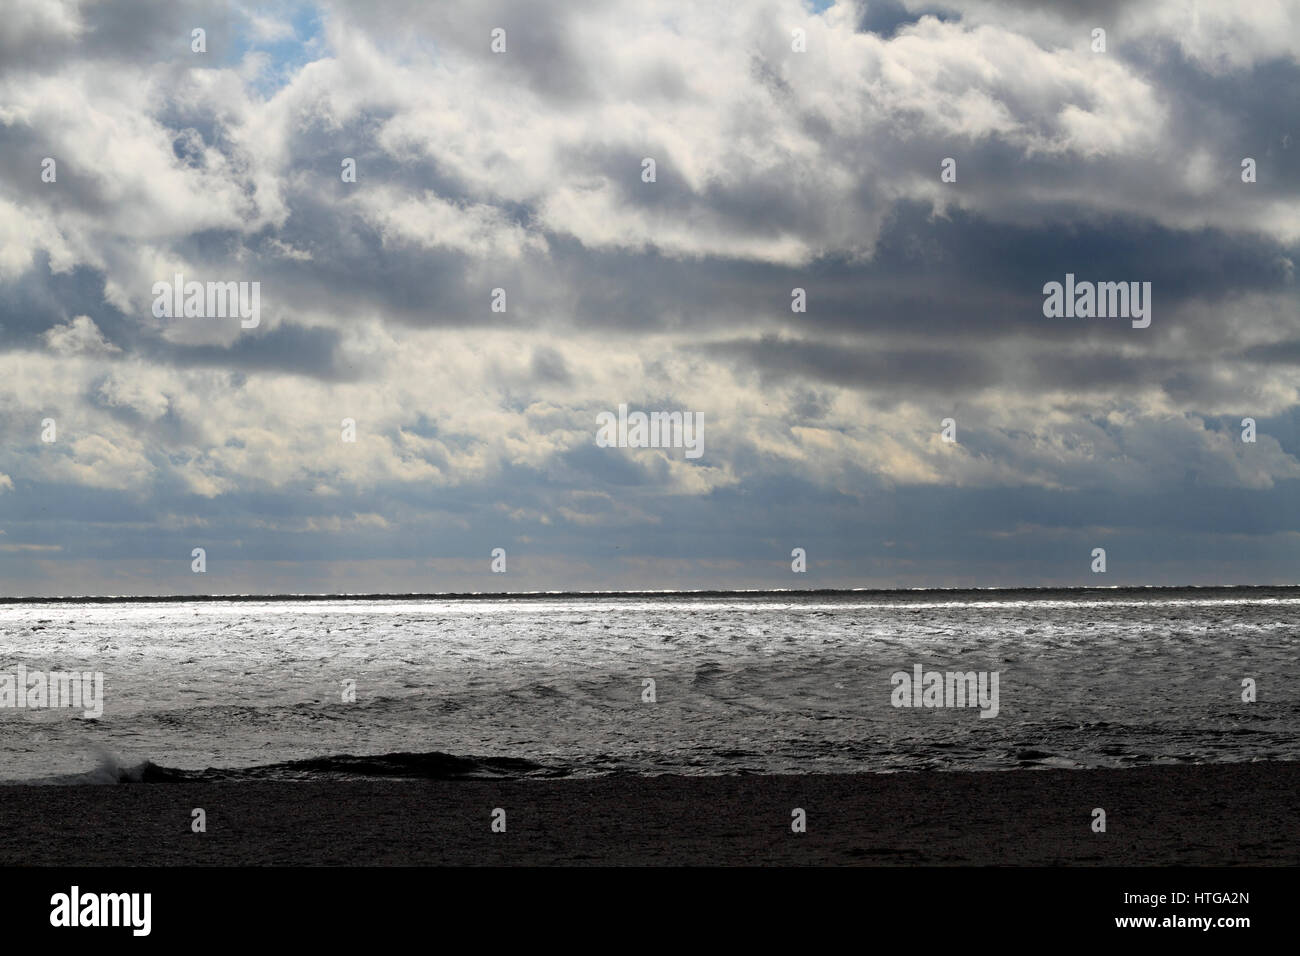 Der Strand in Cape May, New Jersey, USA Stockfoto